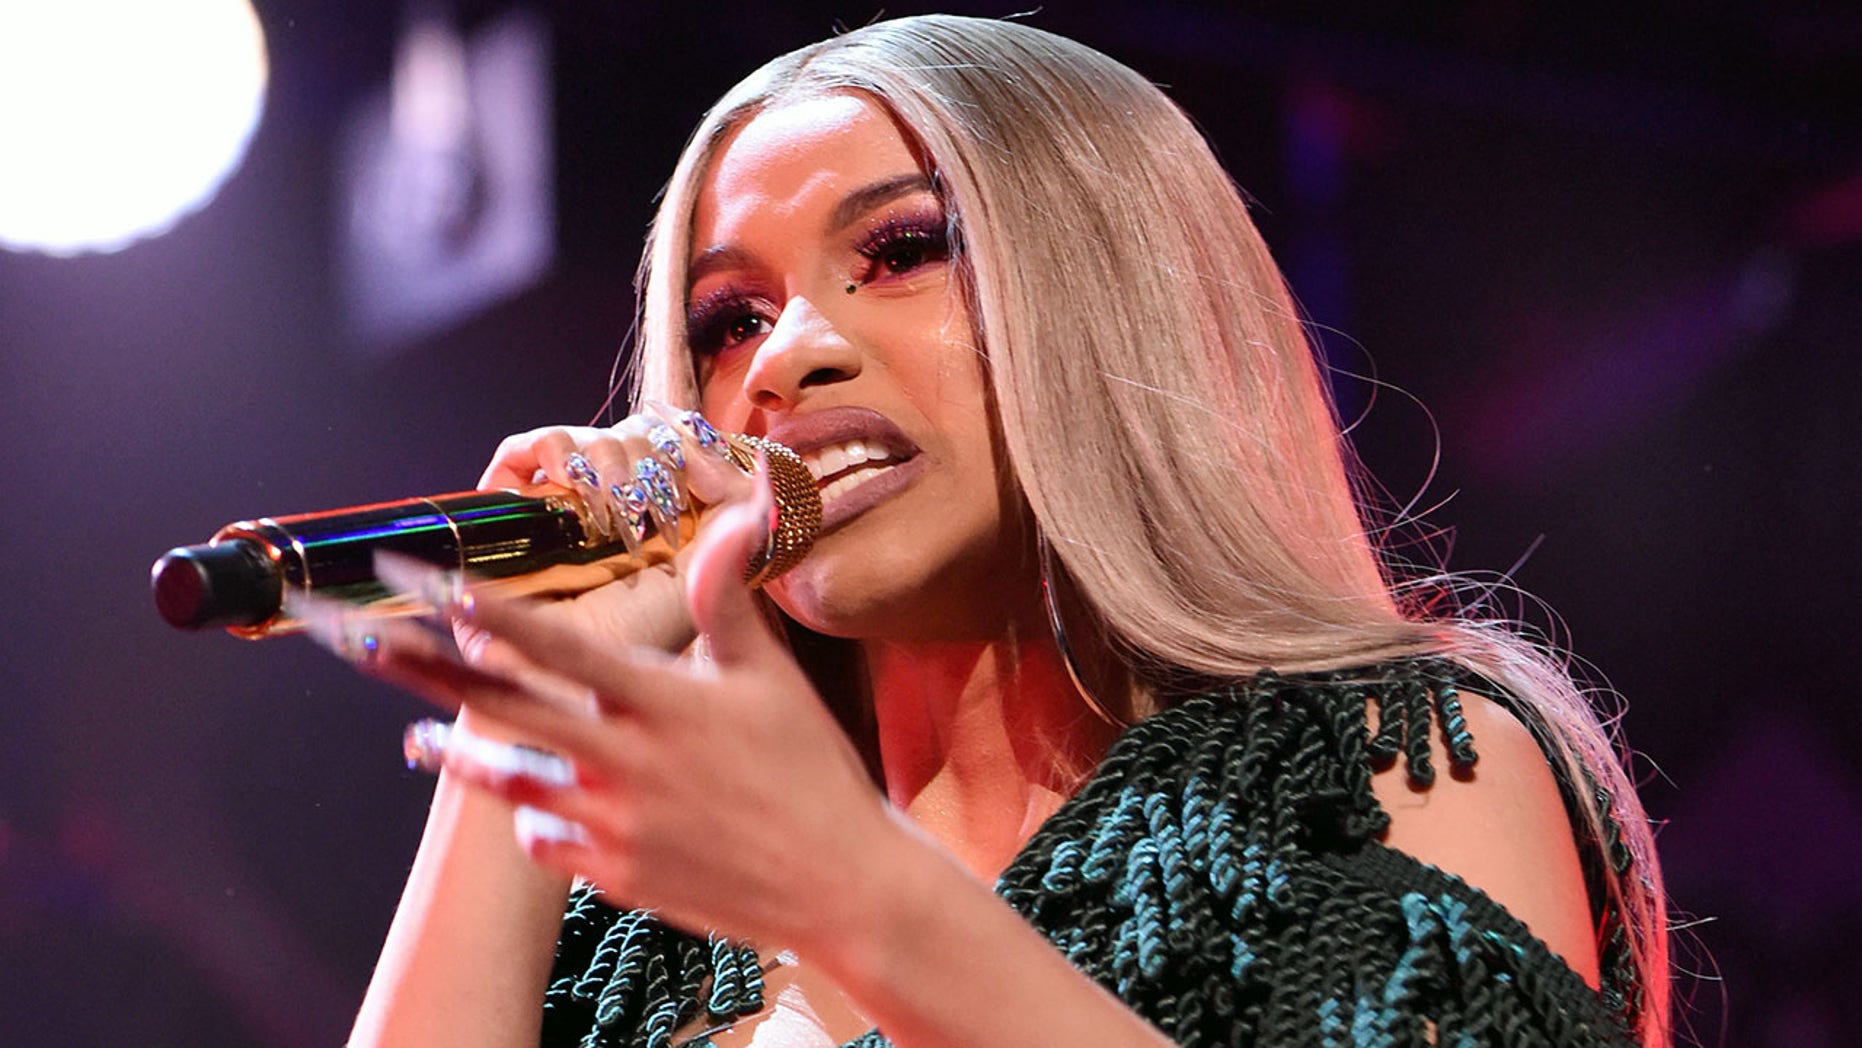 Cardi B lashes out about harassment, pressures of fame in expletive